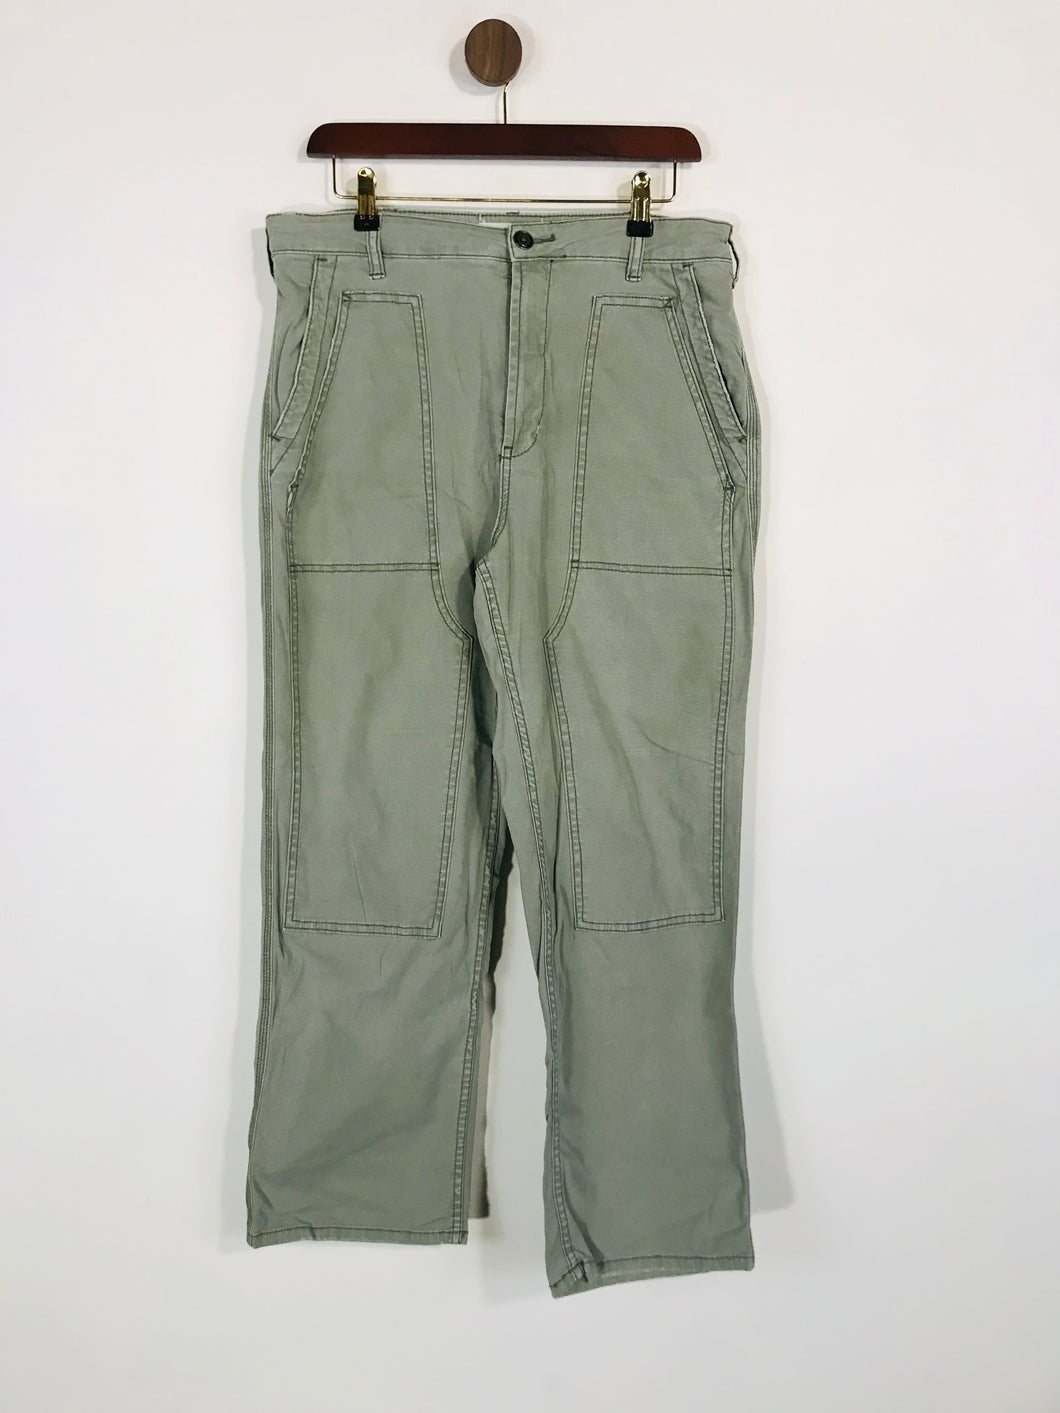 Anthropologie Women's Cotton Casual Trousers | 31 UK12-14 | Green